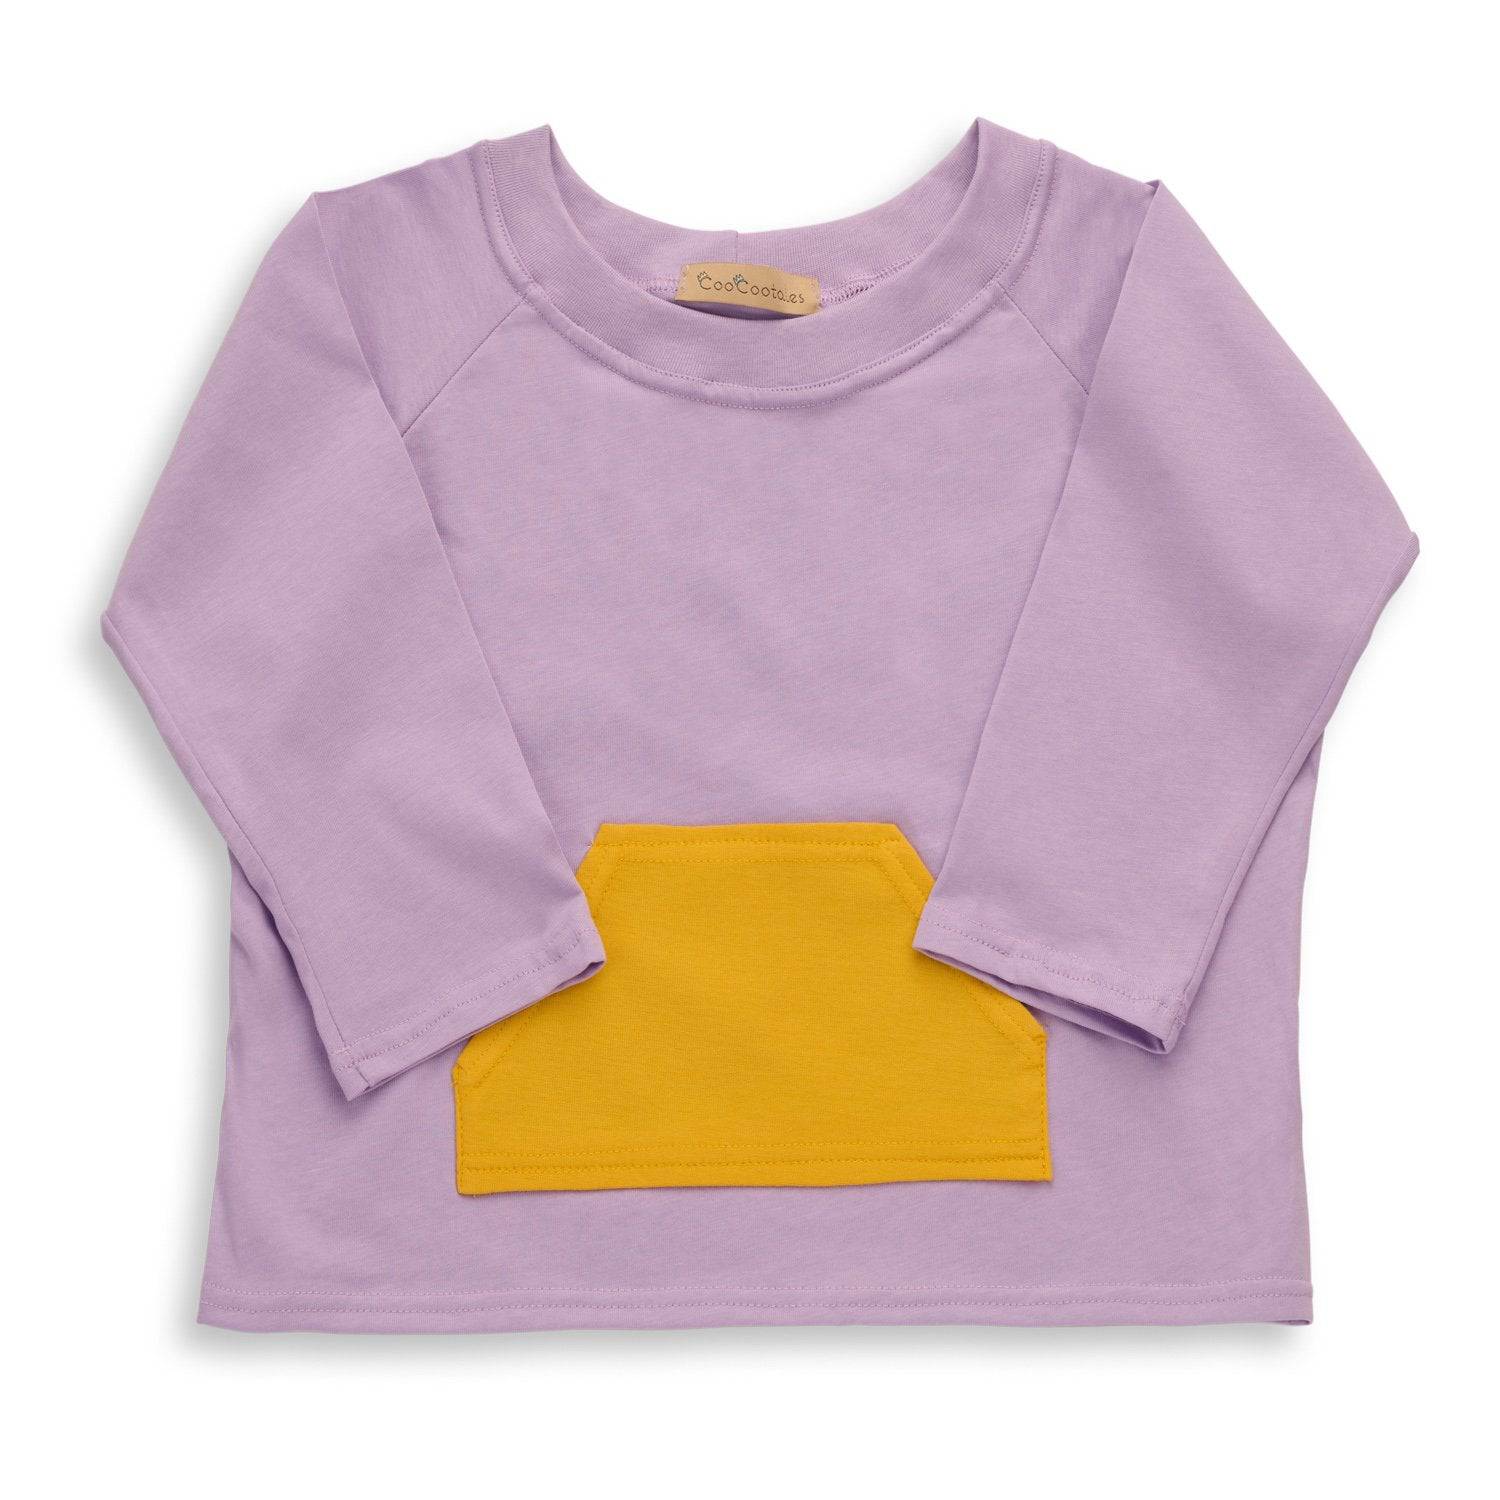 The Boat T-Shirts (boys - purple) - CooCootales